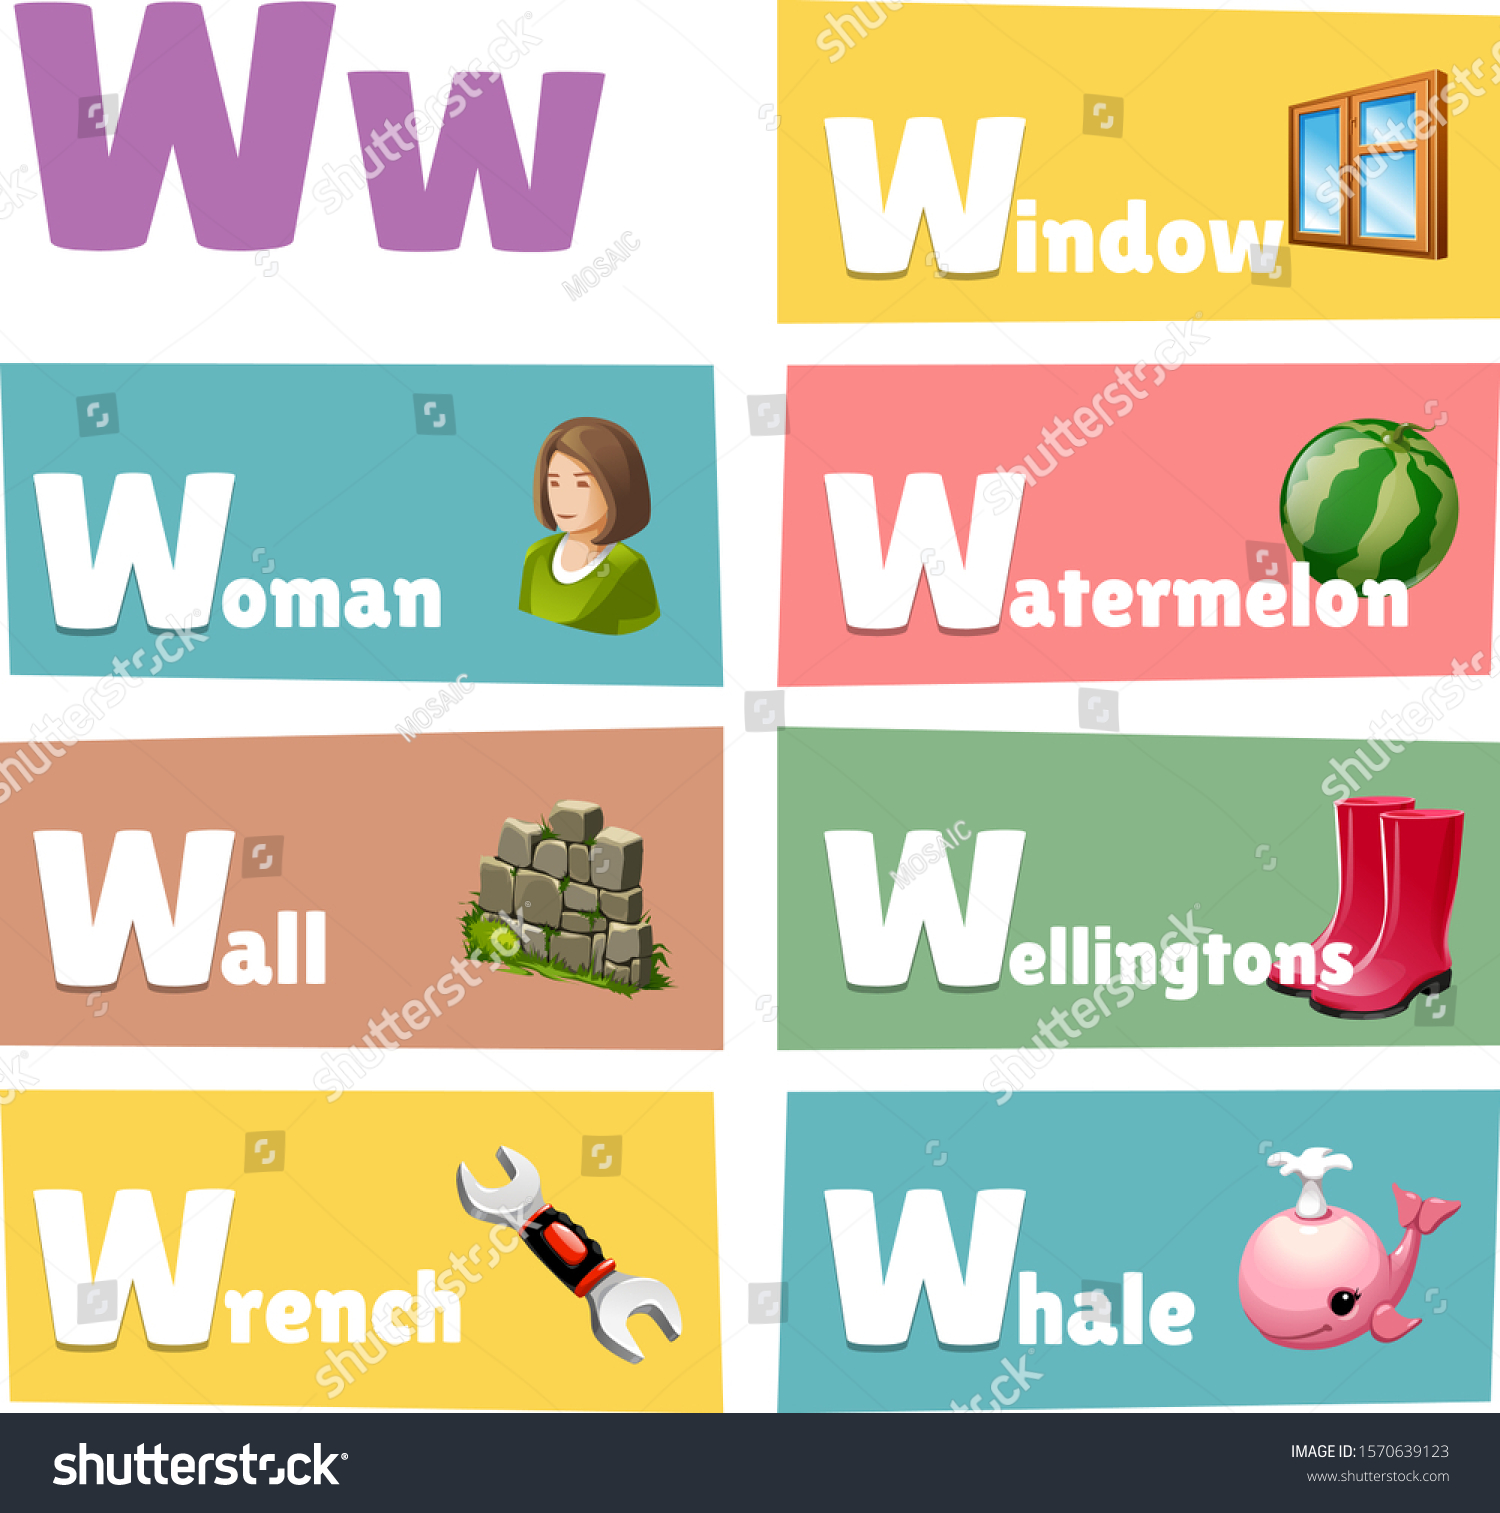 Vector W Letter Pictures Words W Stock Vector Royalty Free 1570639123 Shutterstock